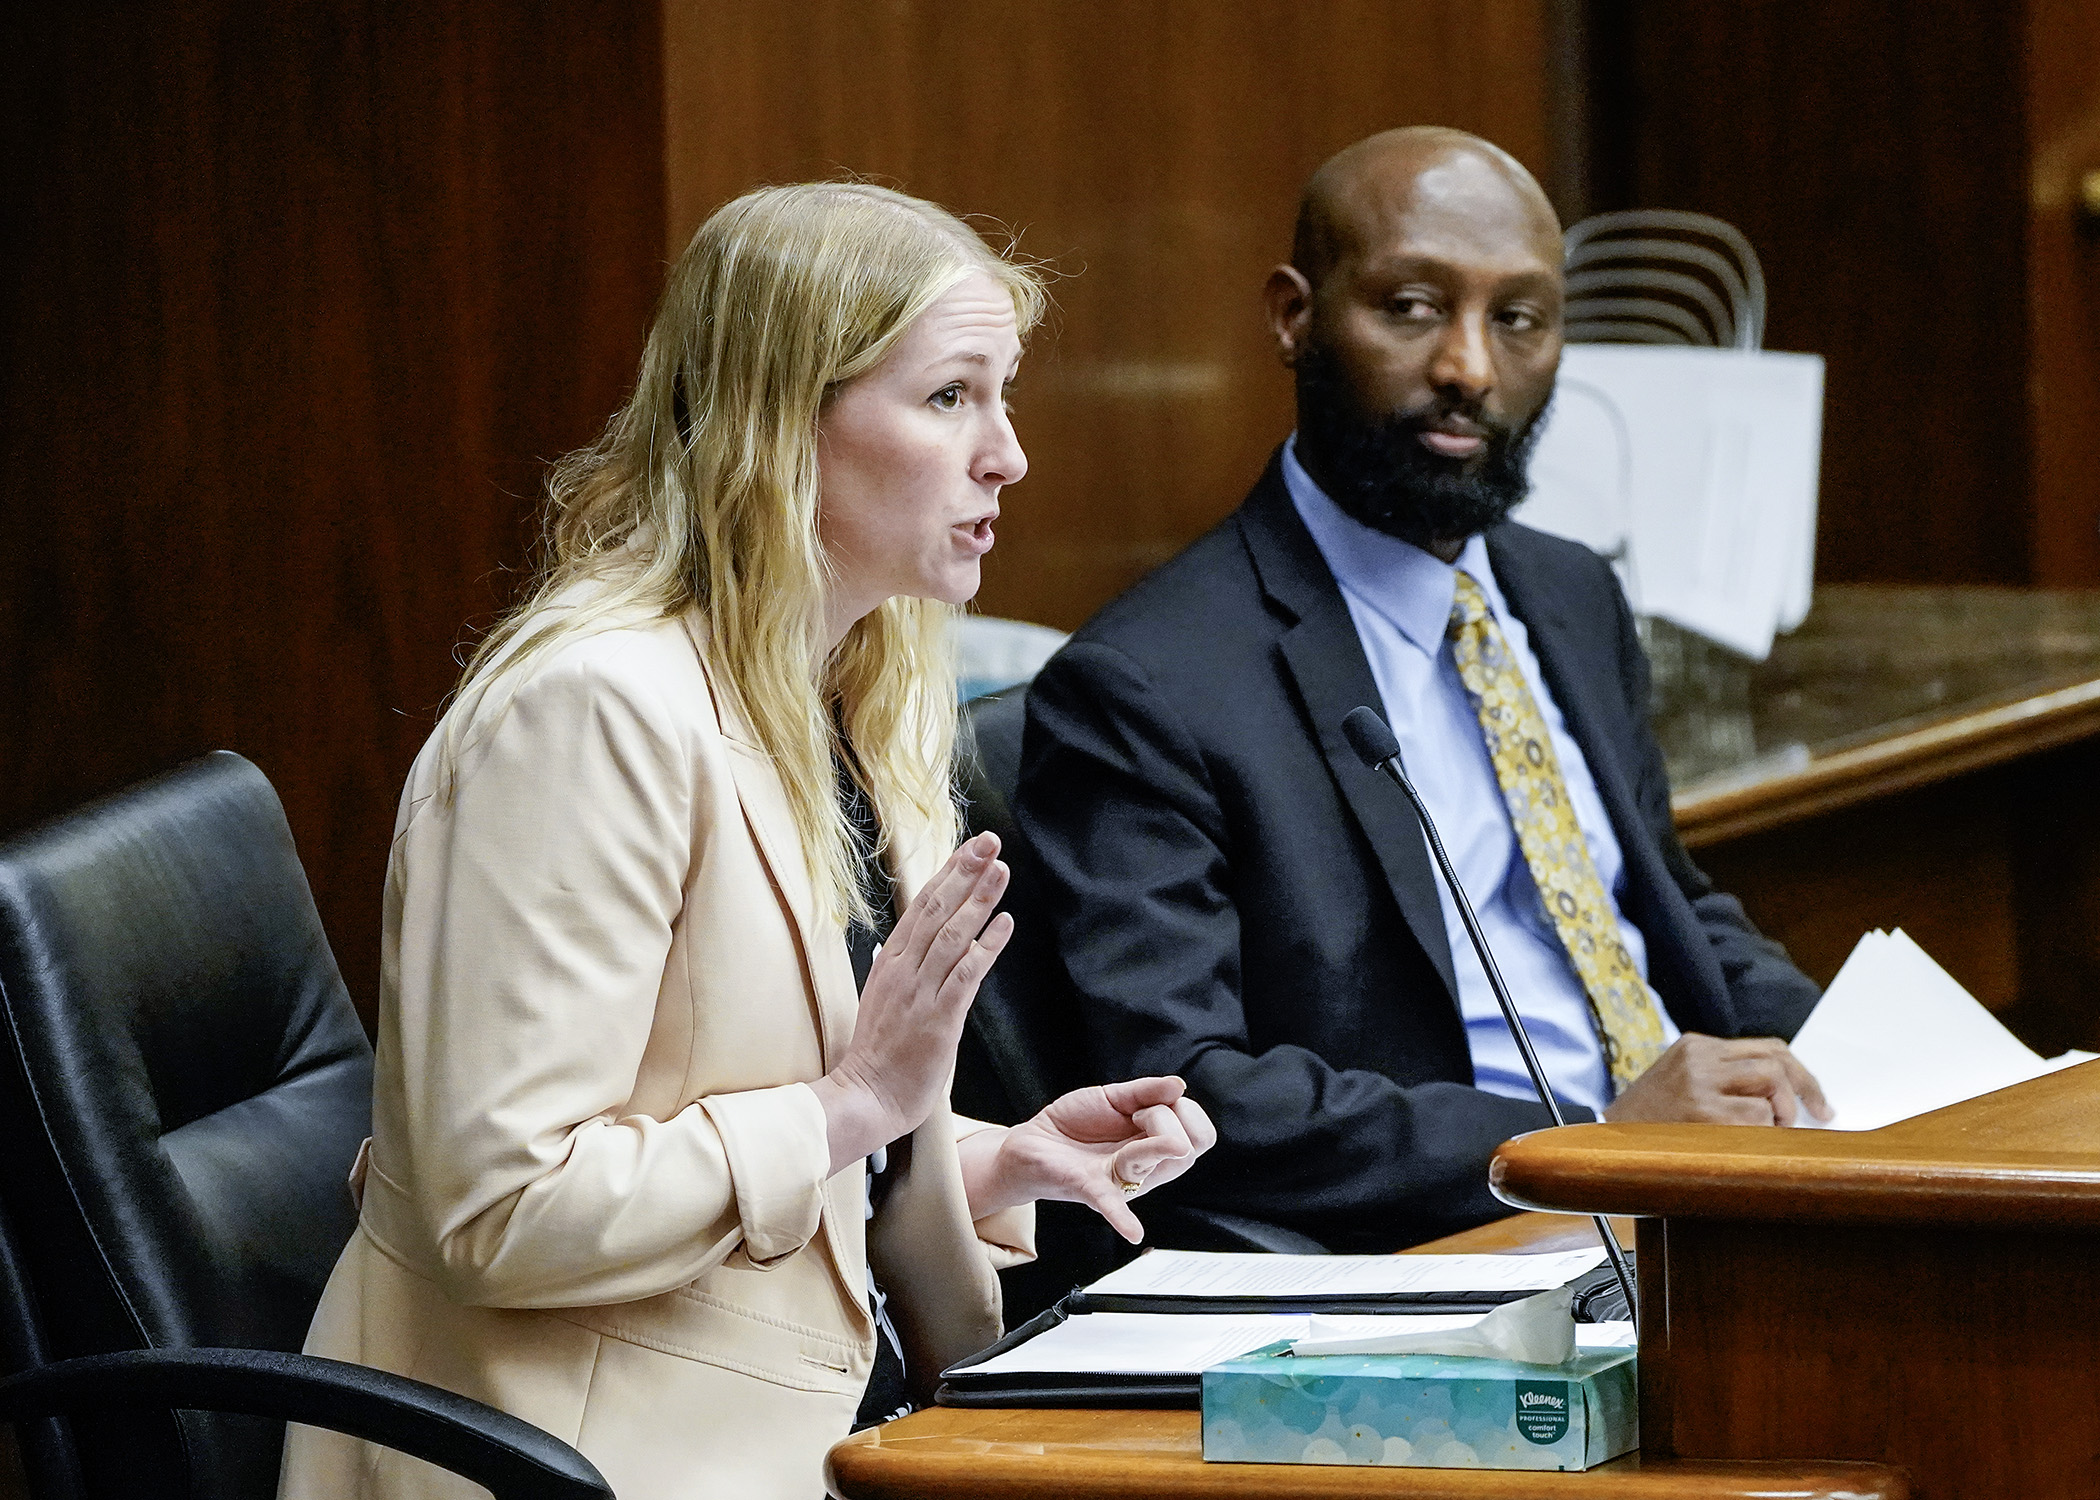 Shana Tomenes, staff attorney for University of Minnesota Student Legal Service, testifies for a bill sponsored by Rep. Mohamud Noor, right, that would provide tenant remedies related to new construction delays. (Photo by Andrew VonBank)